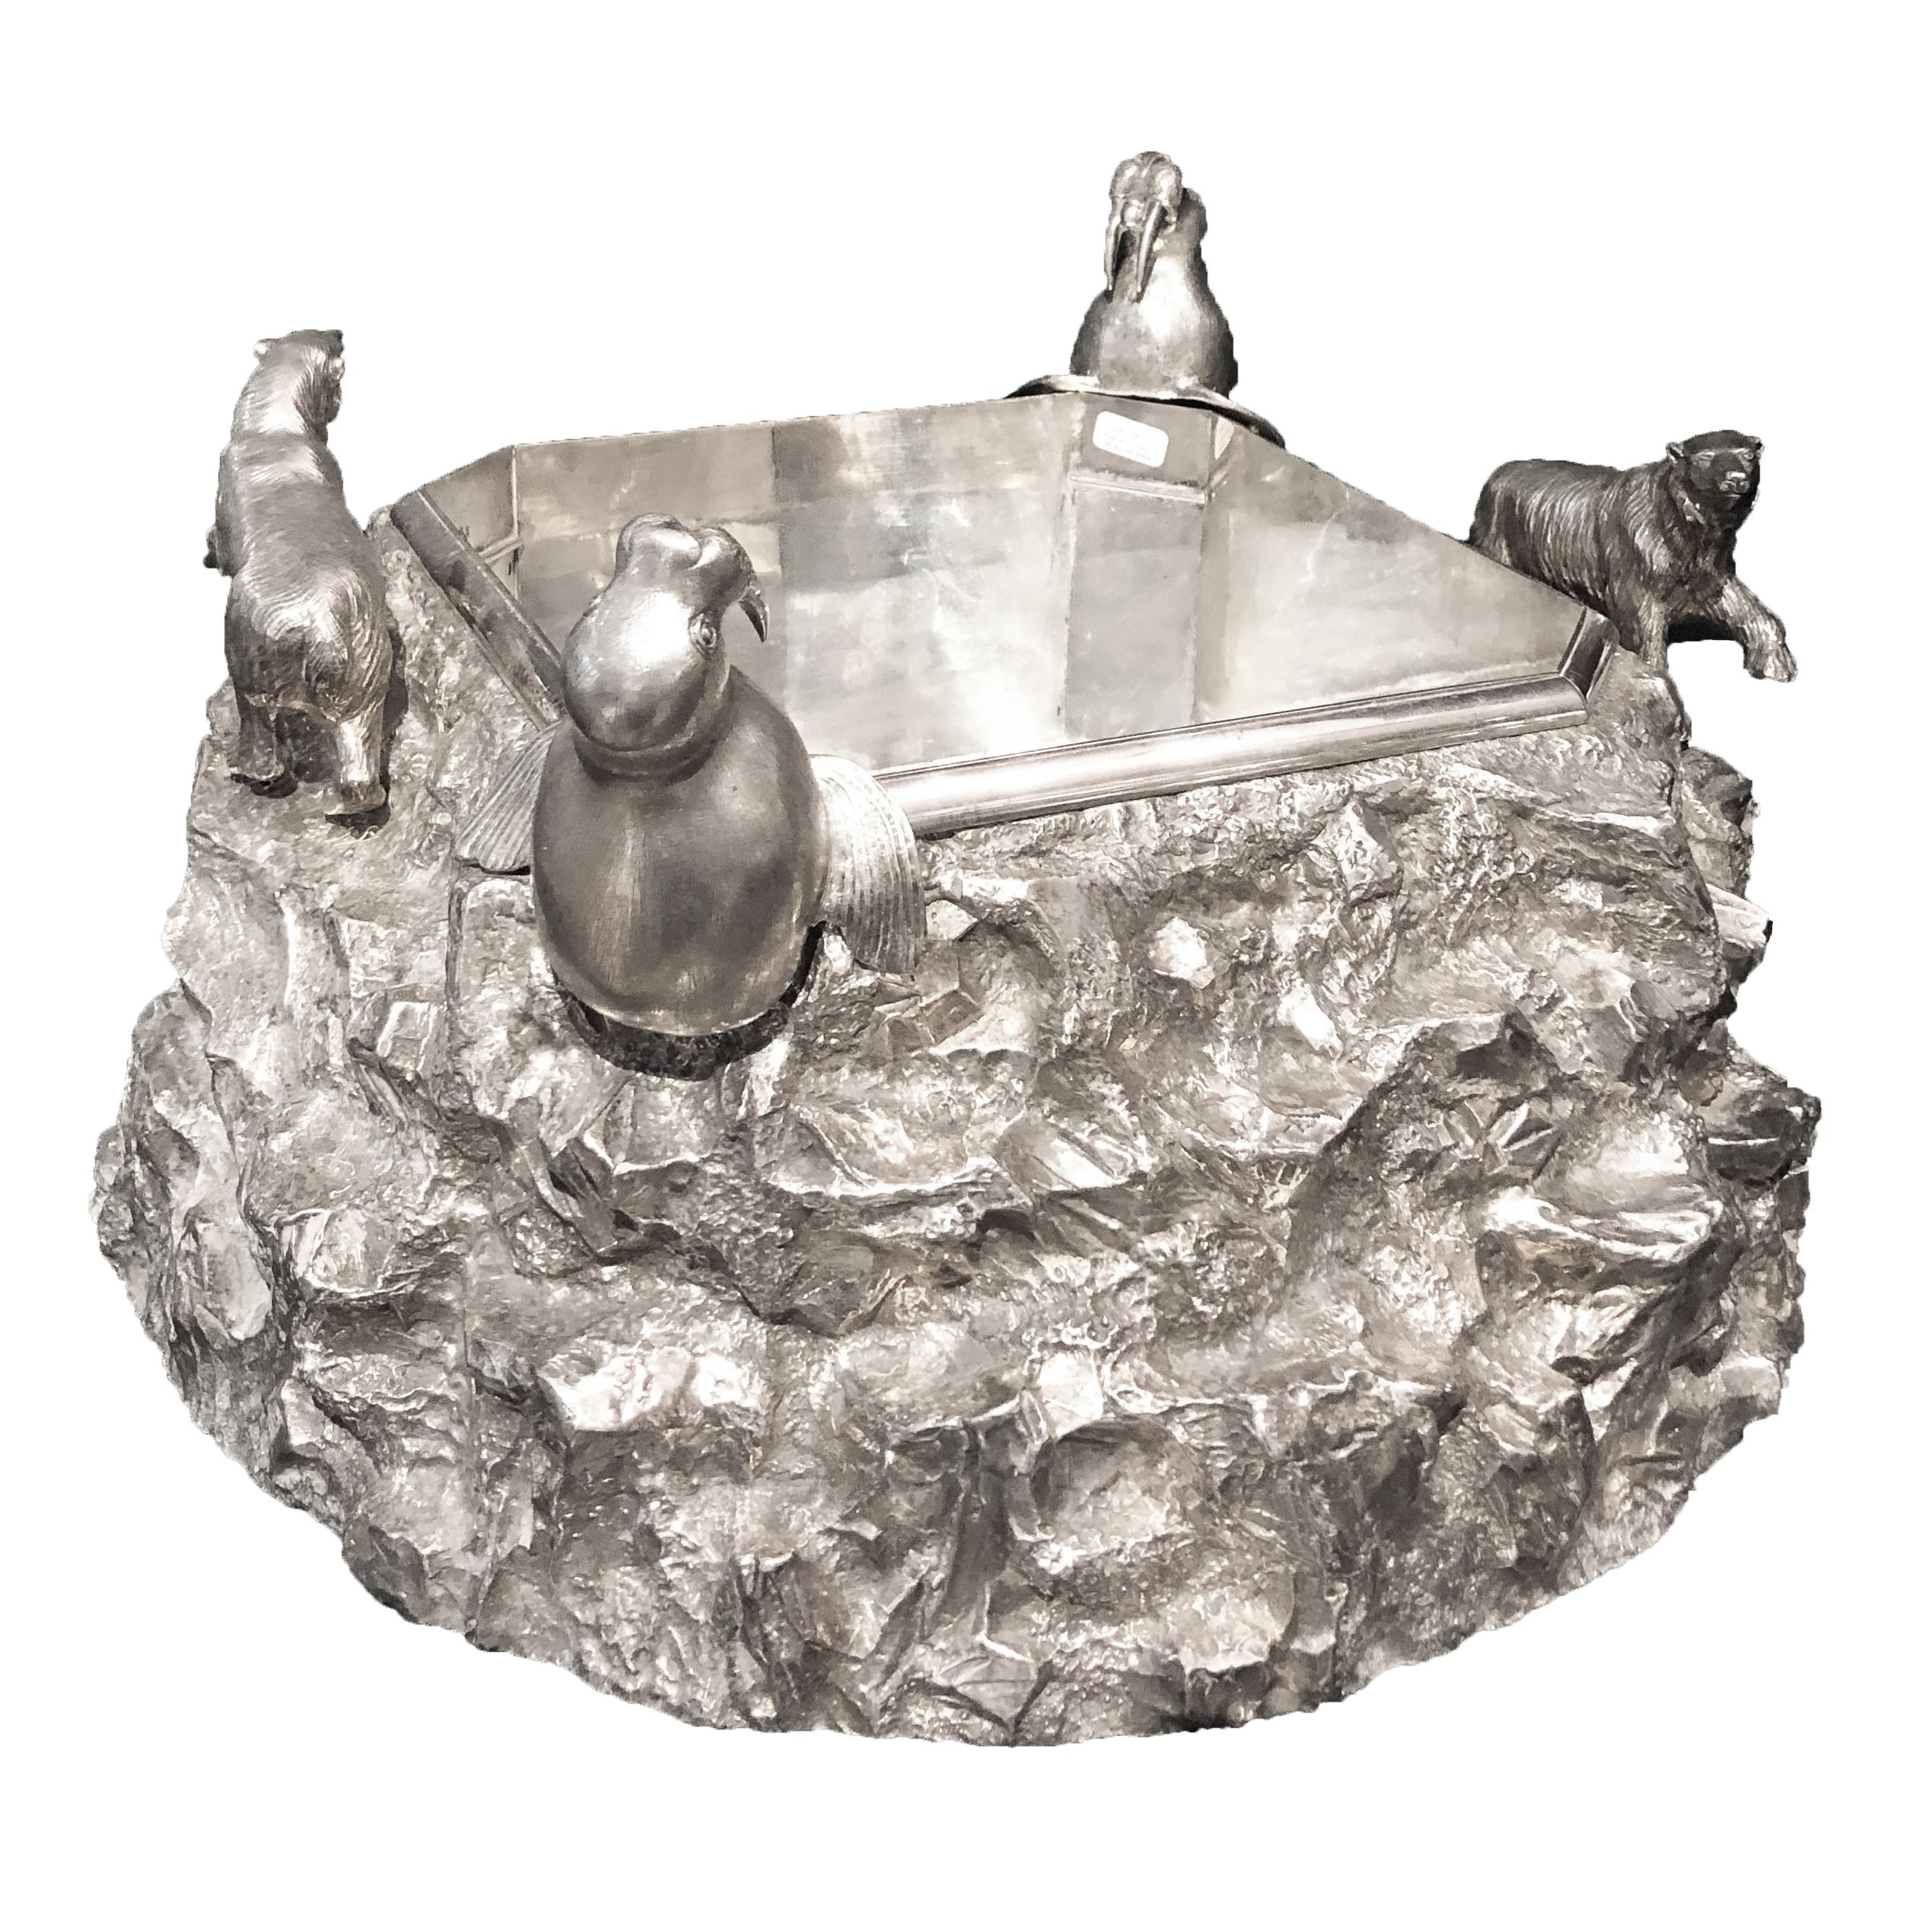 Late Victorian Centerpiece, Bottles or caviar Cooler Victorian Iceberg Silver-Plated end 19th